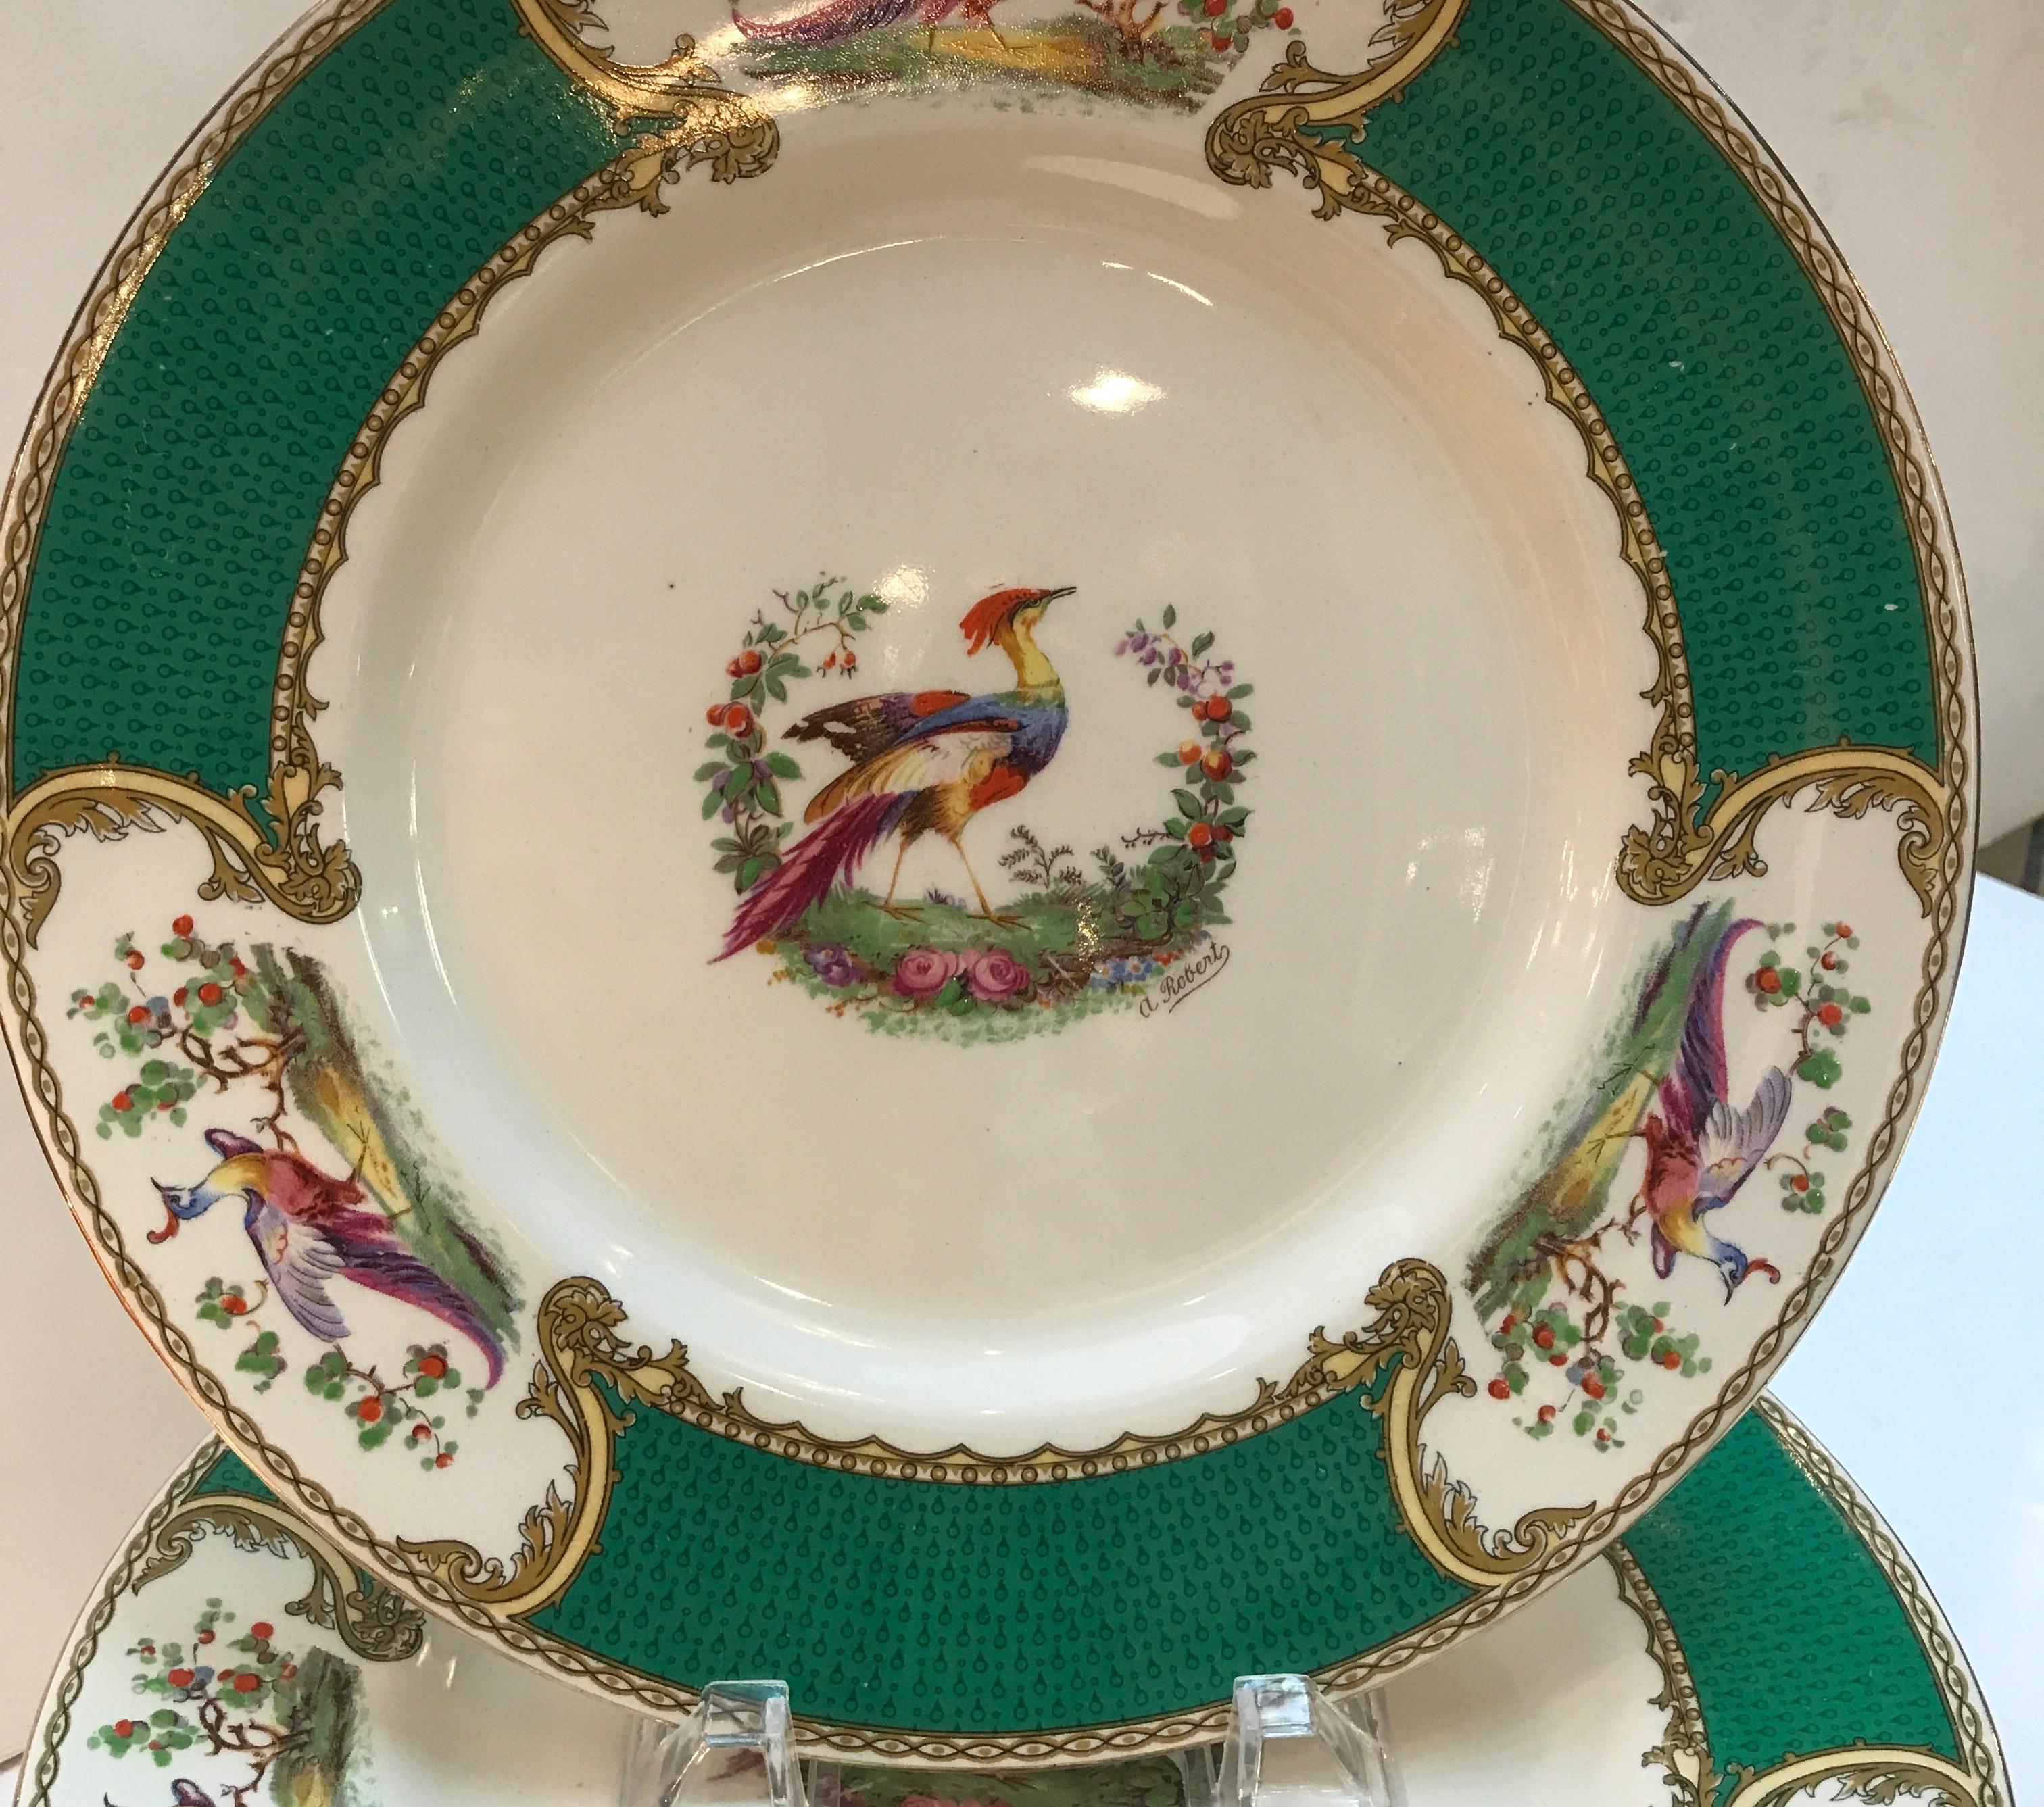 A set of ten Myott English Staffordshire plates in the Chelsea bird pattern. The plates are 10.75 inches in diameter, with hand painted floral and bird decoration in the 18th century style of Chelsea bird. The off white background with vibrant green